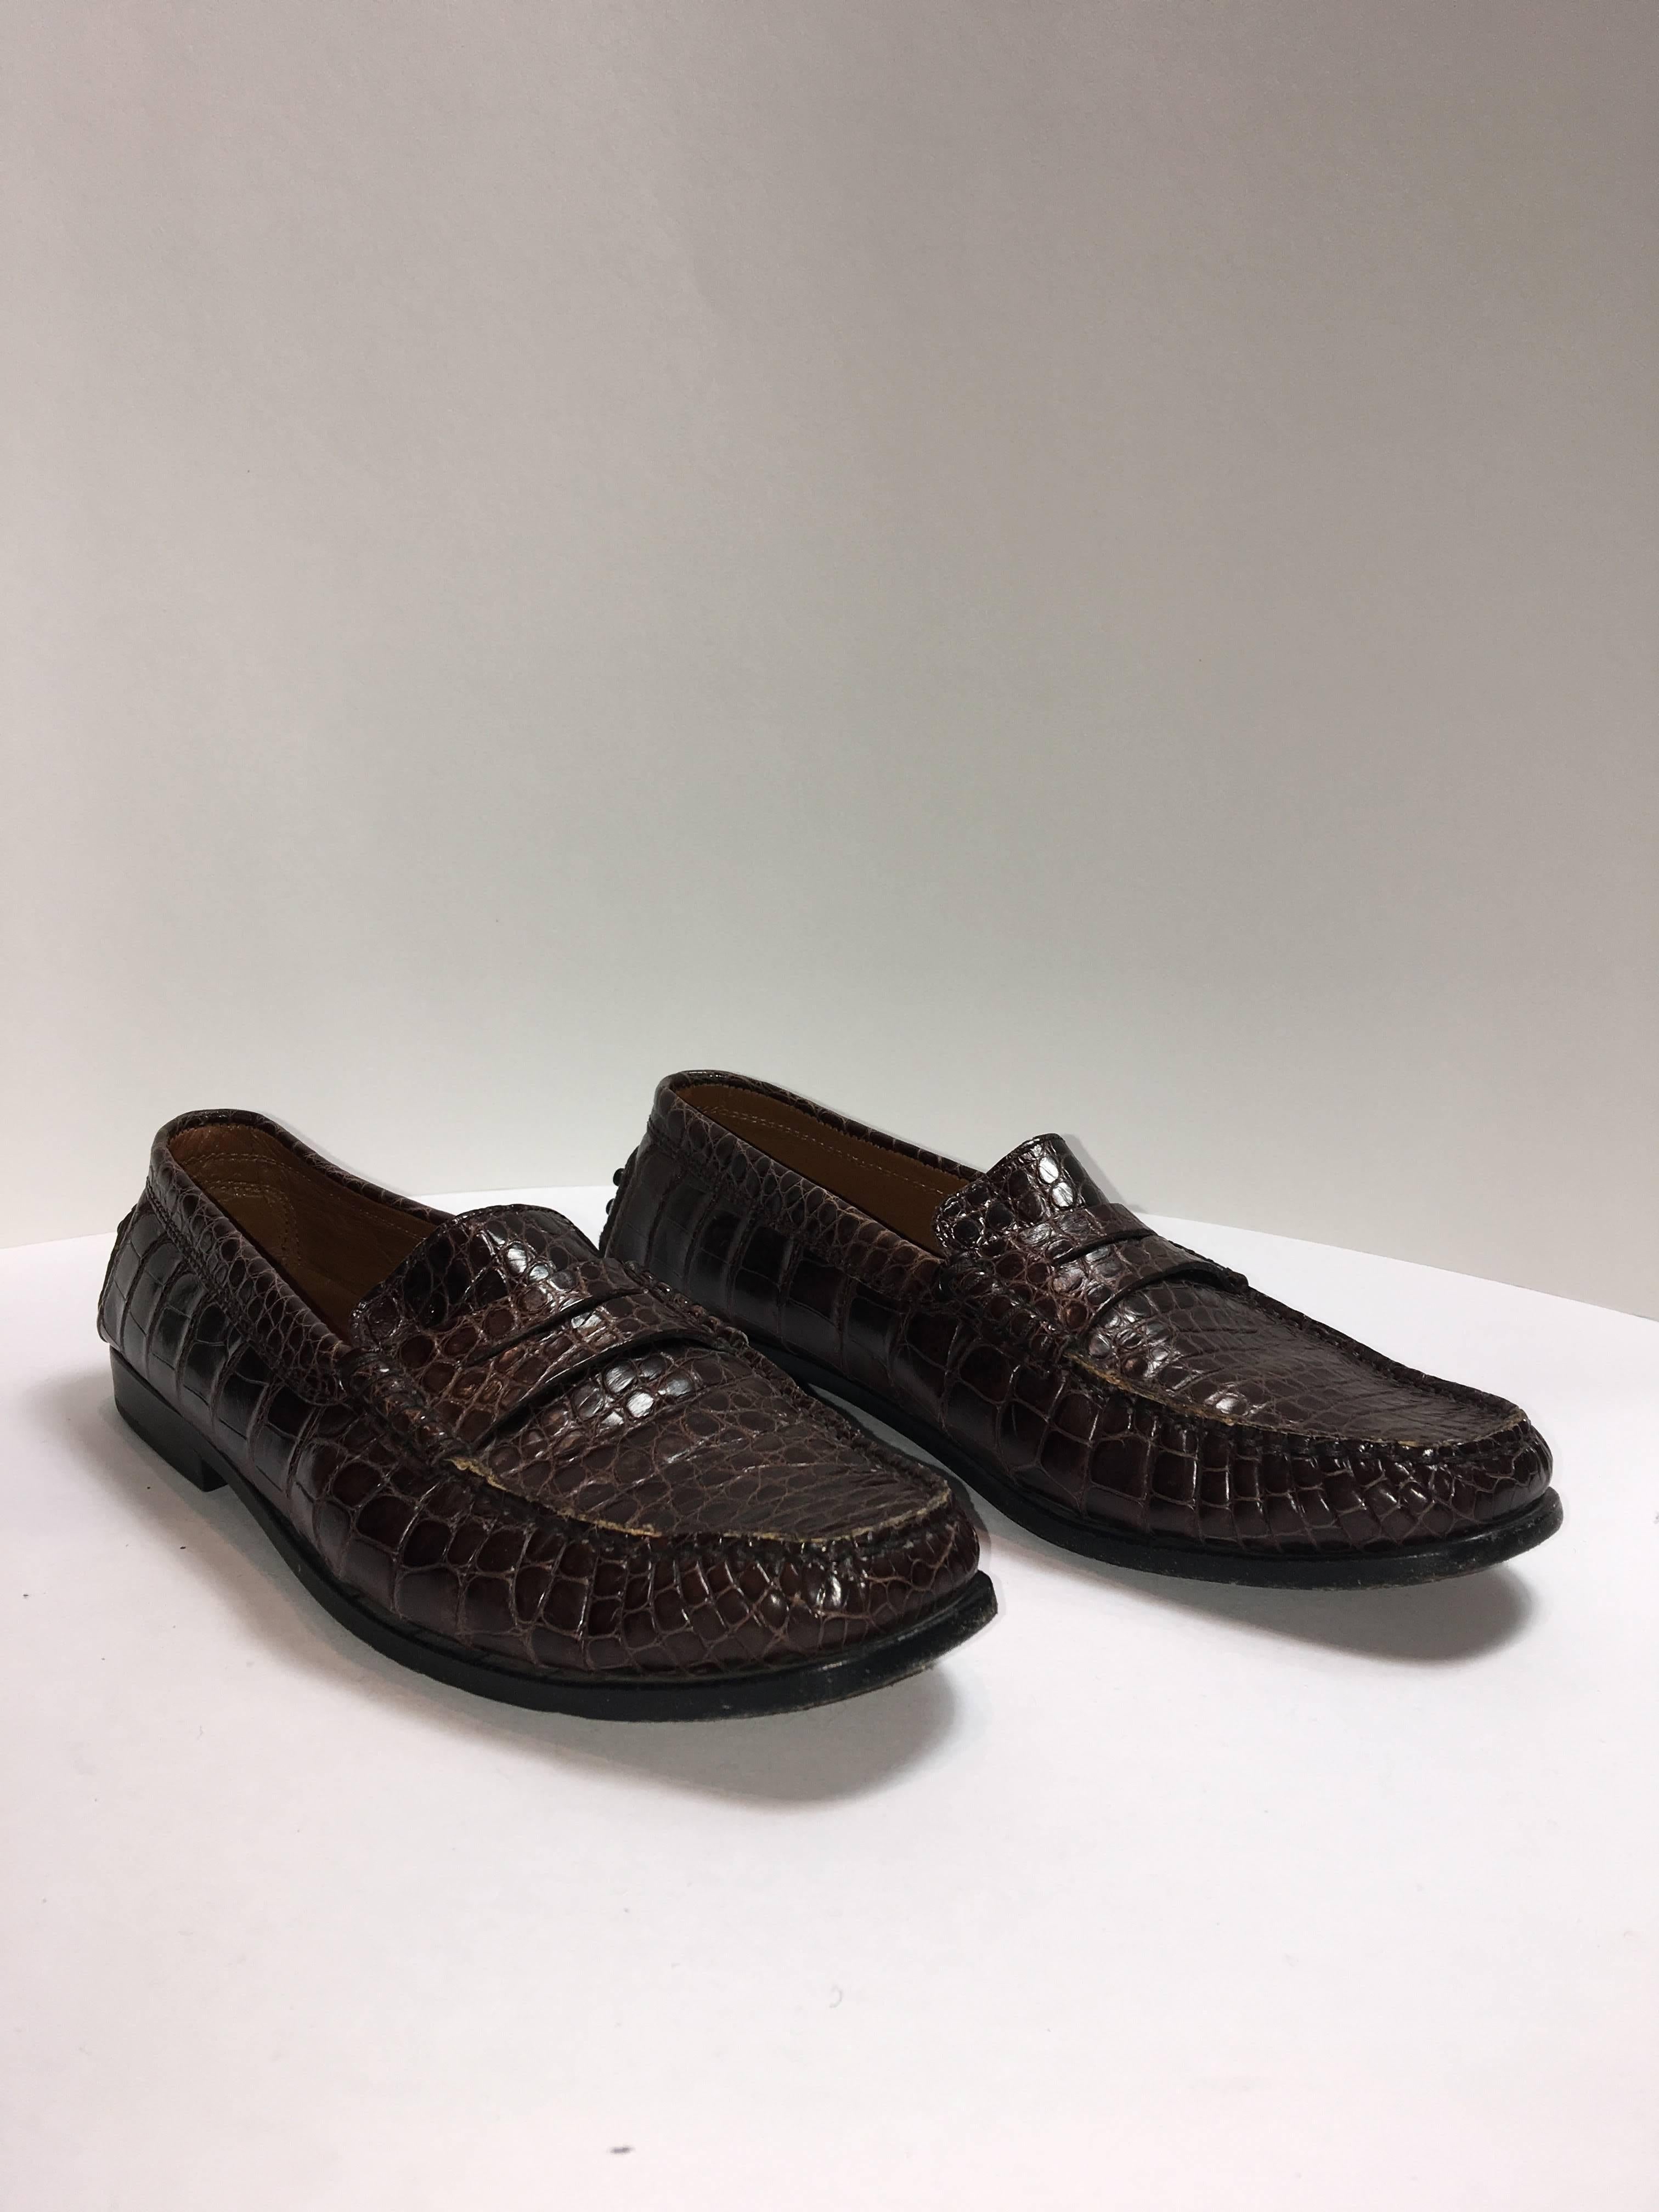 Brown embossed crocodile leather loafers. Patent gloss flats. 